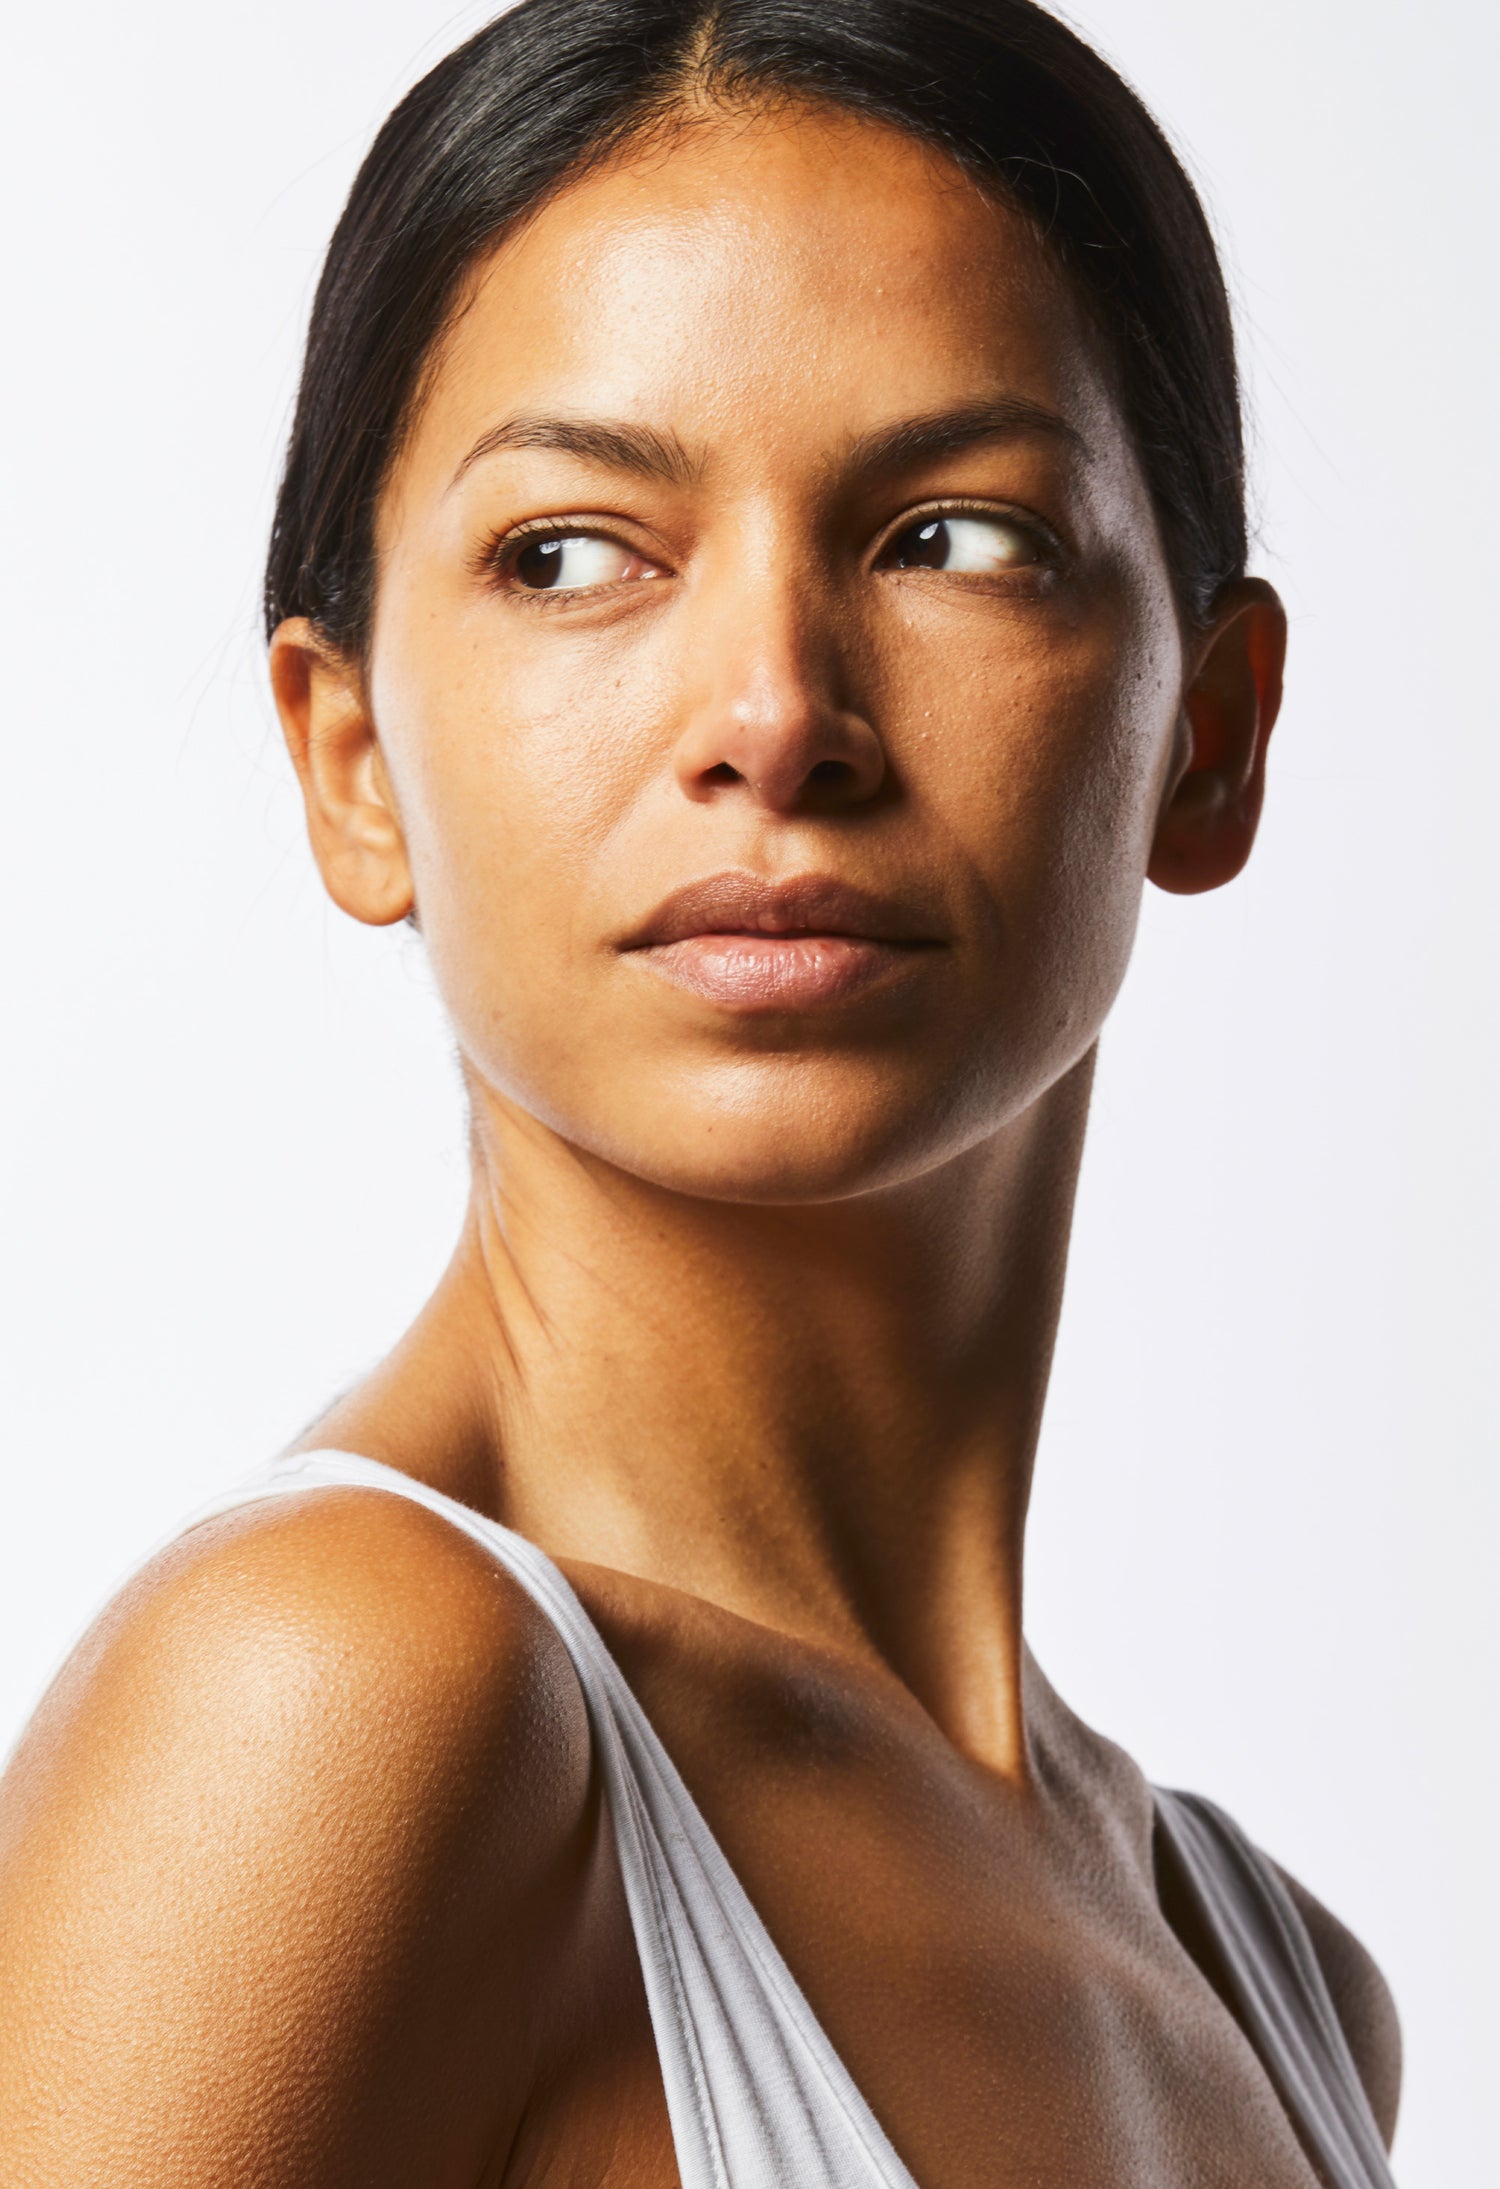 A shoulders up image of a model with clear, glowing skin looking to the side.